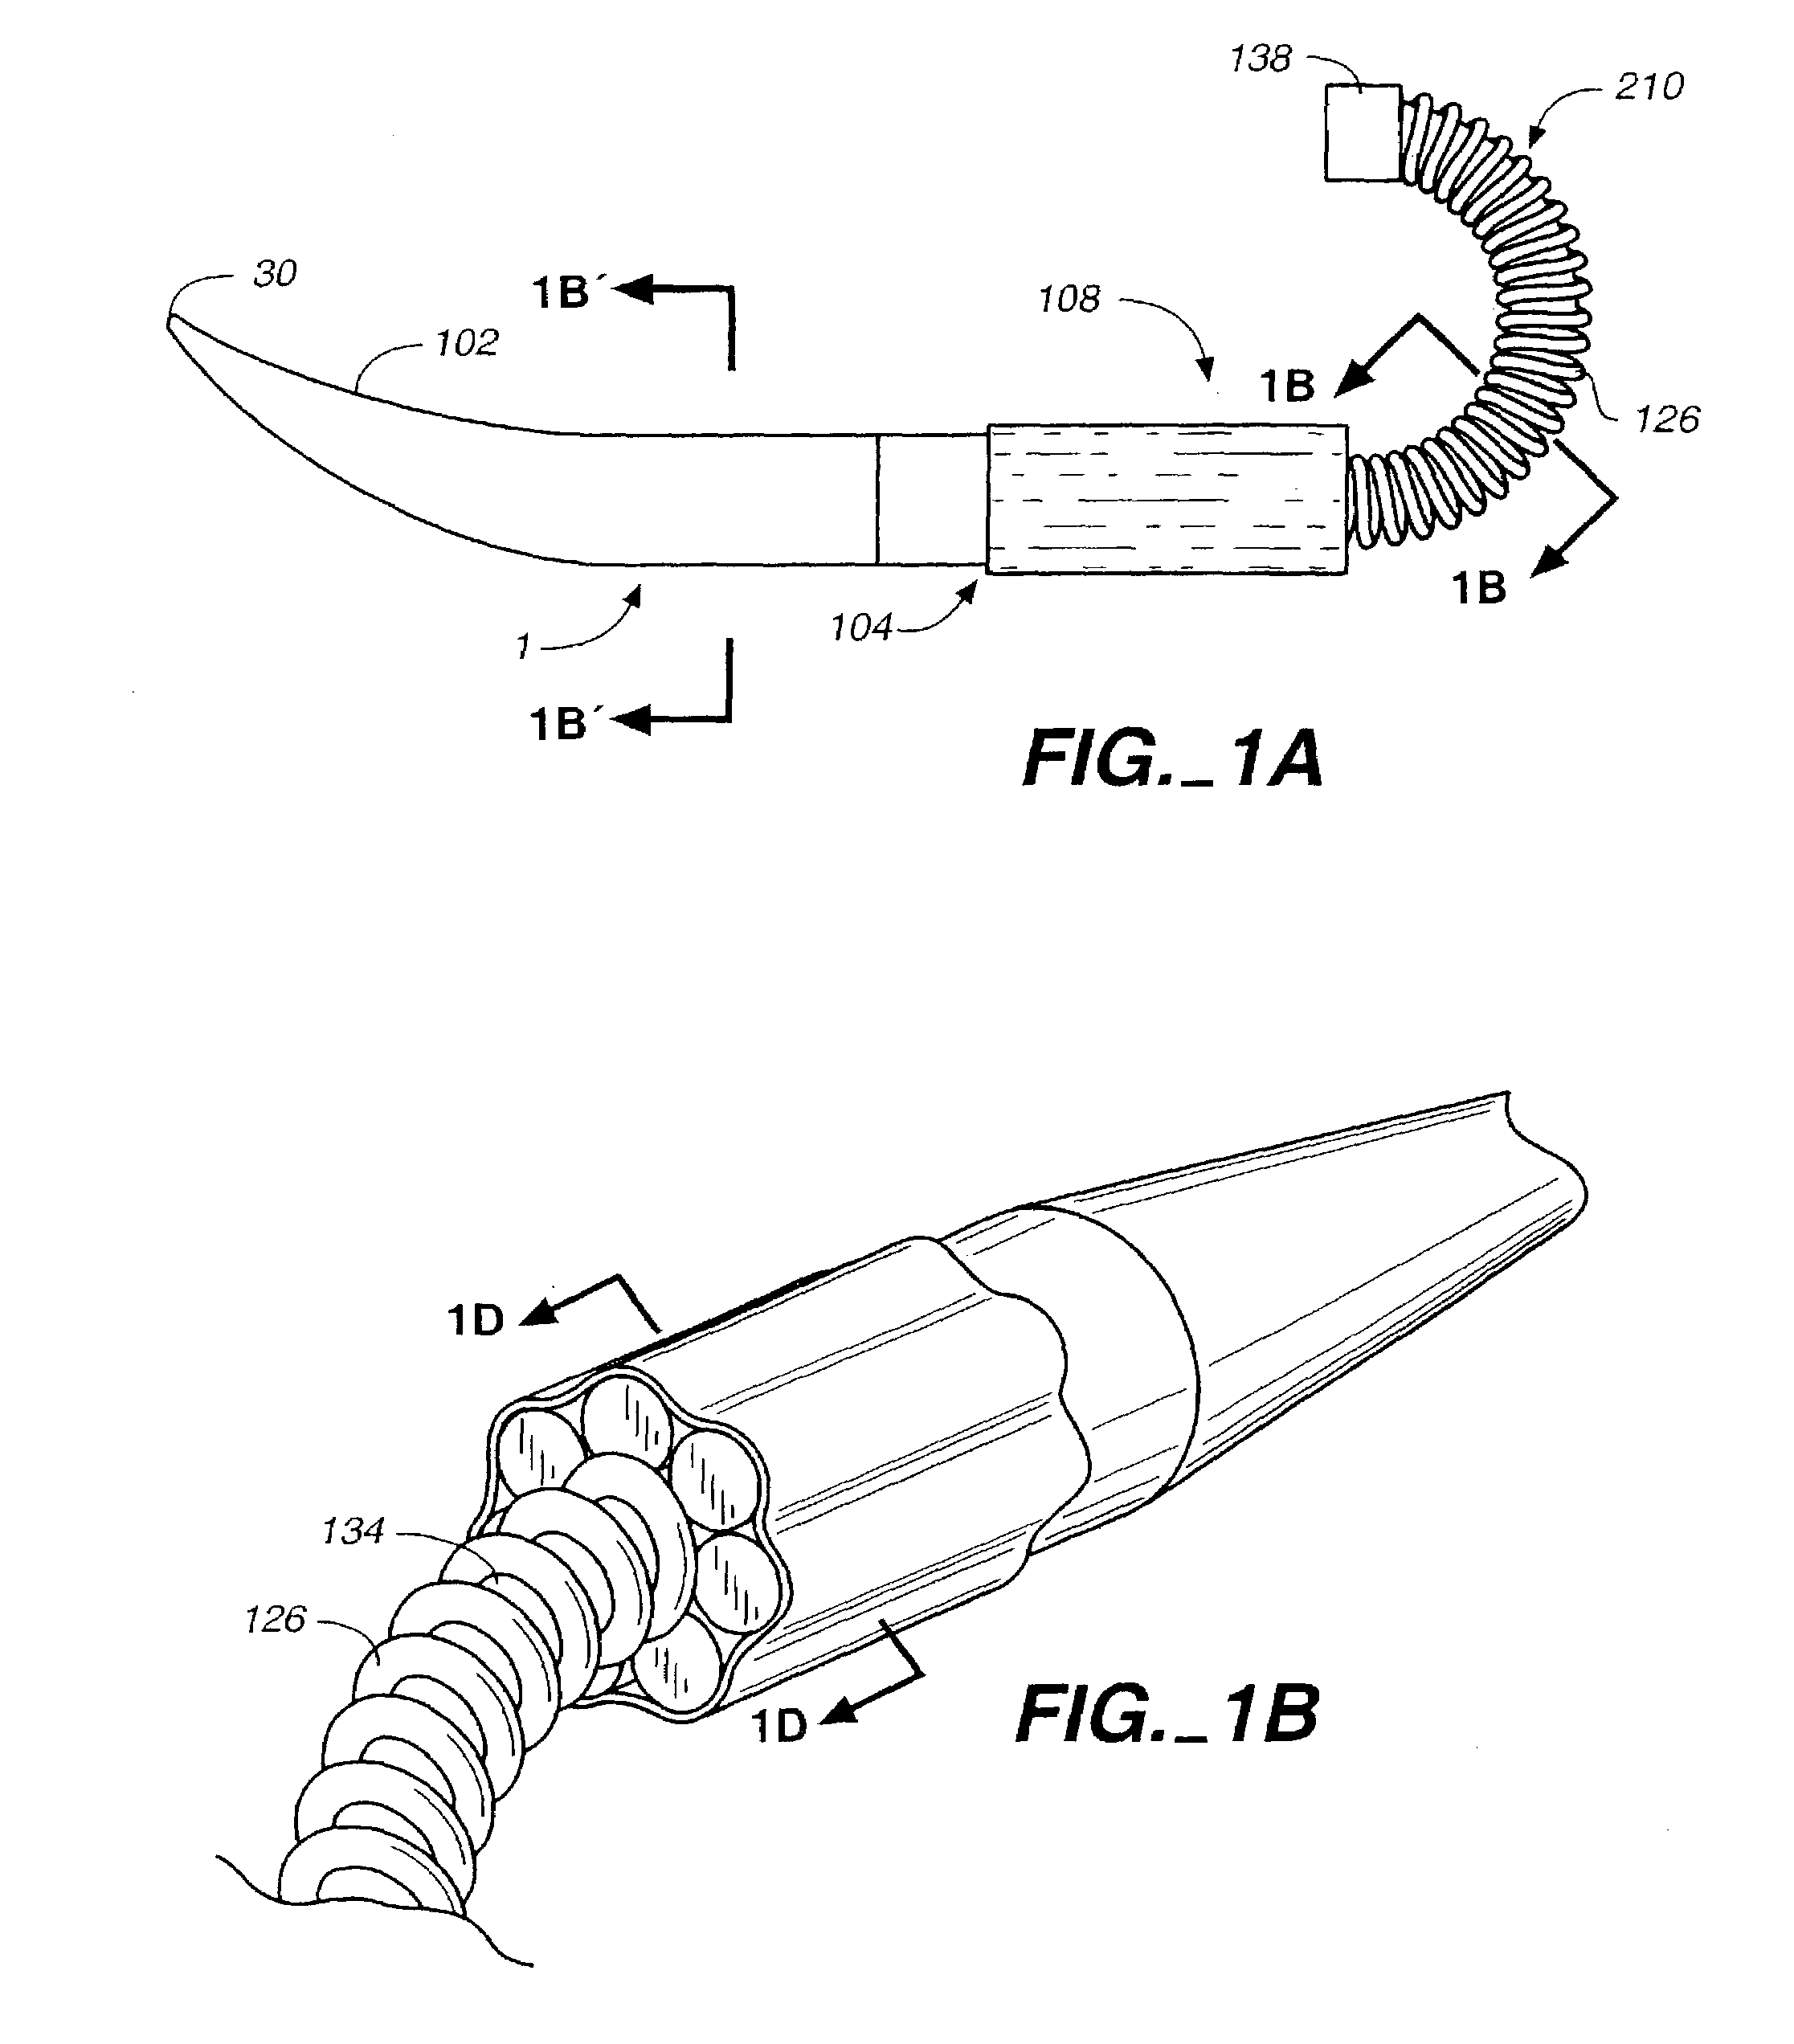 Tissue connector apparatus with cable release